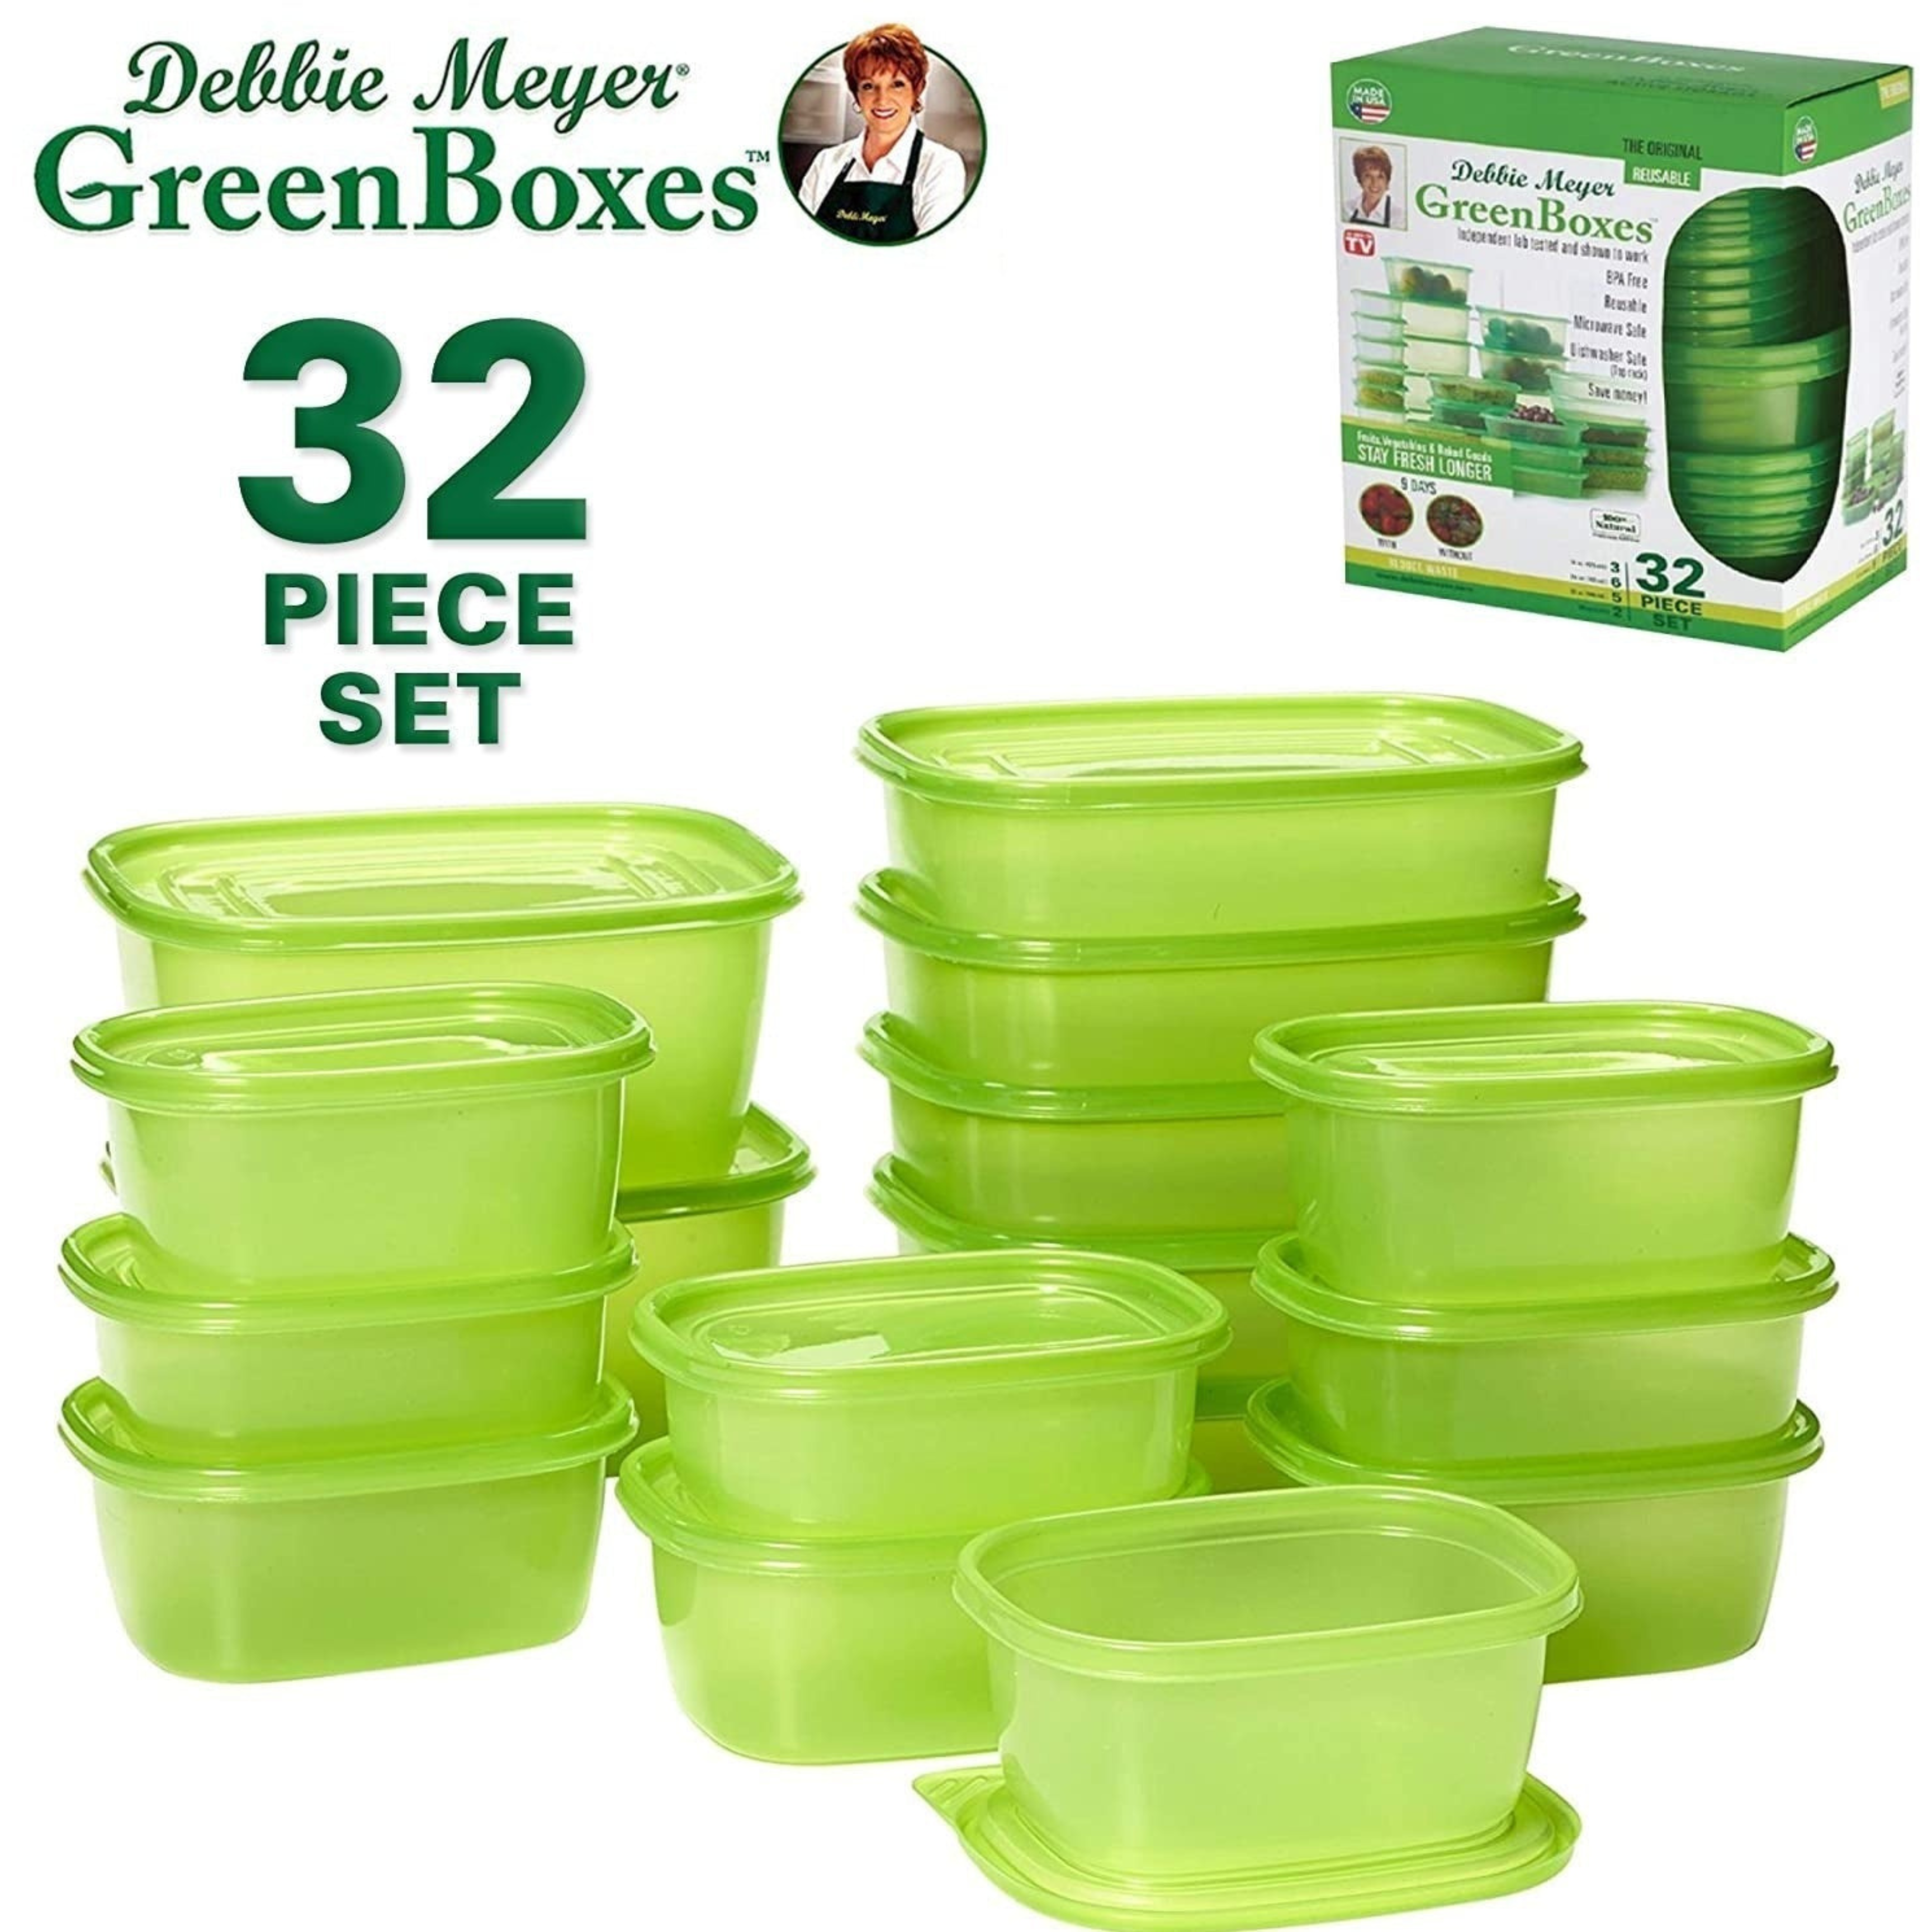 Going Green with Bagasse Takeout Containers - W.B. Mason's Blog